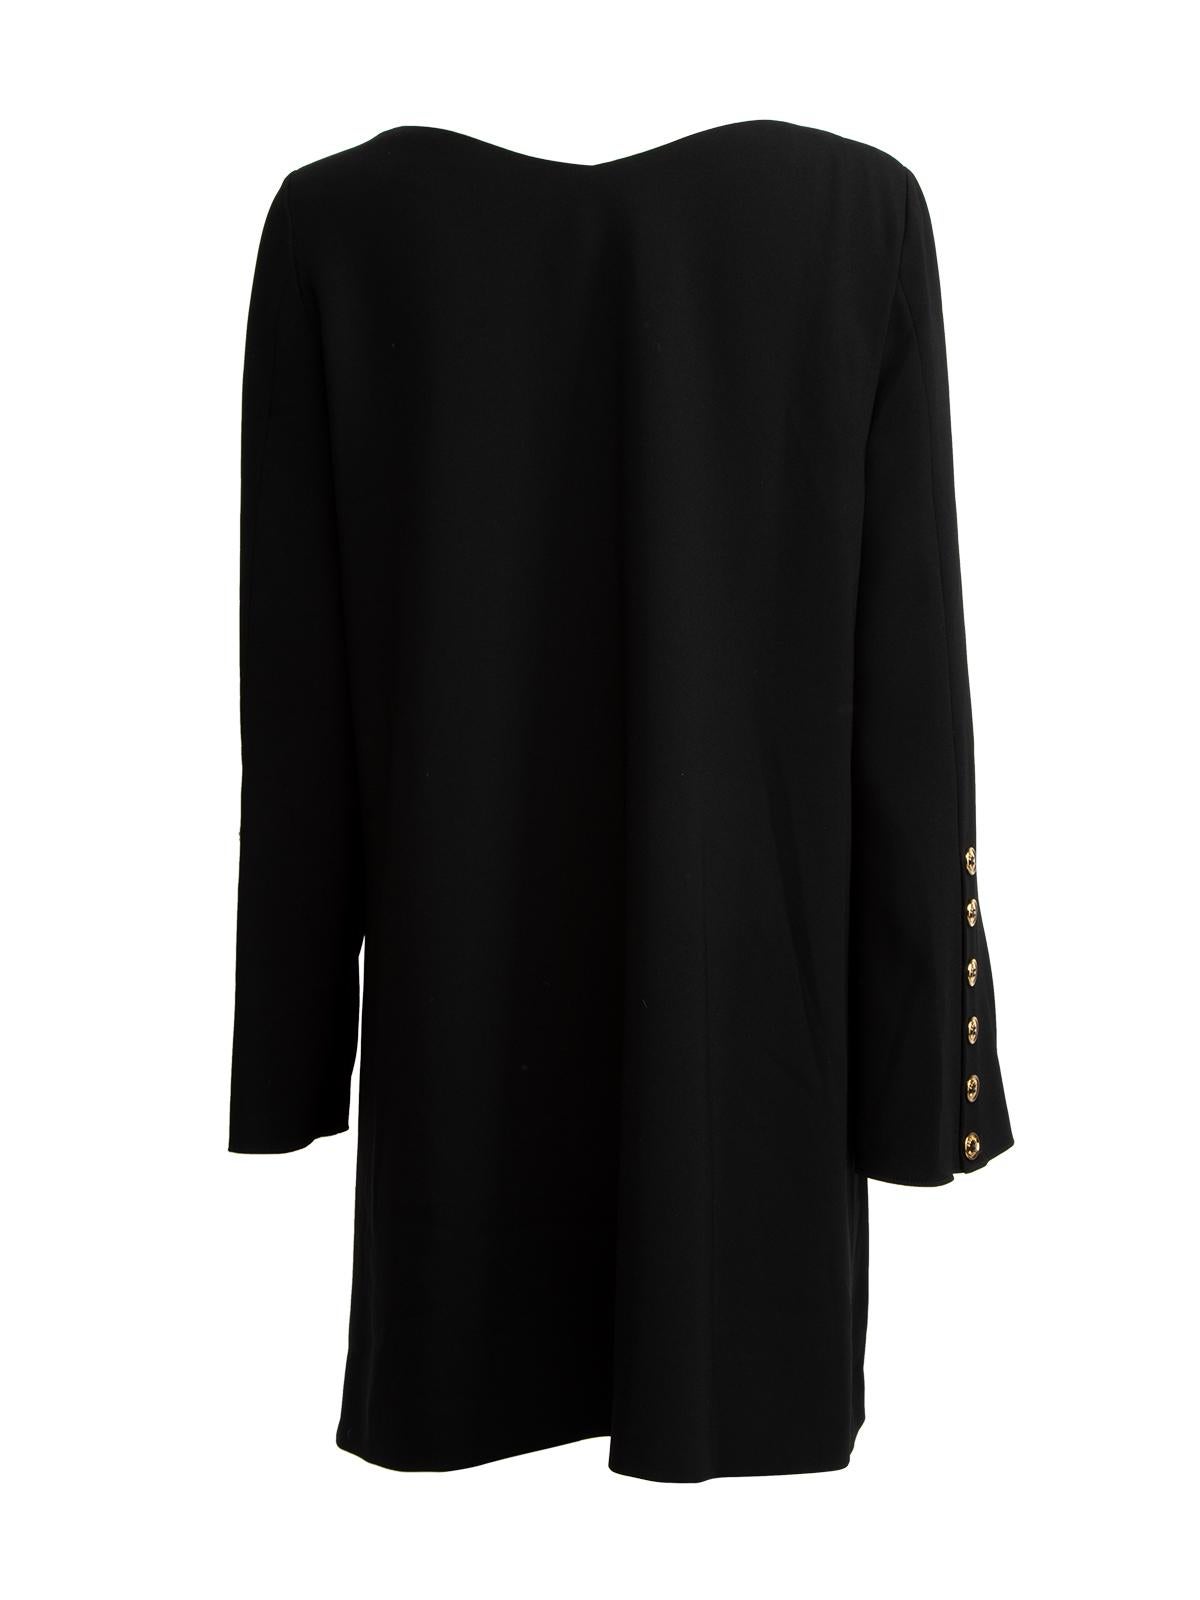 Pre-Loved Boutique Moschino Women's Long Sleeved Dress with Gold Button Detail In Excellent Condition In London, GB